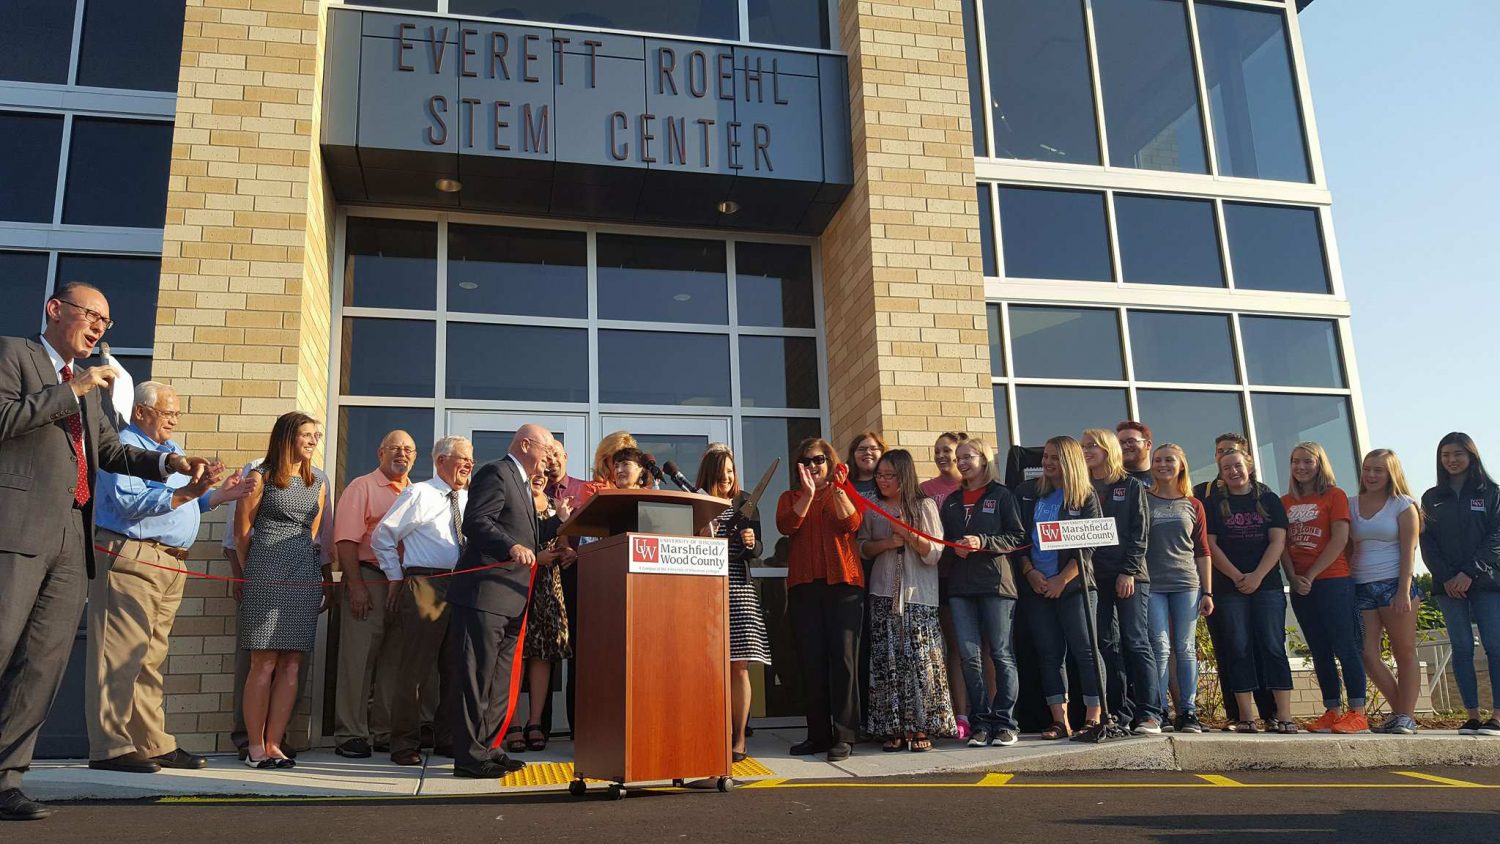 The ribbon cutting for the Everett Roehl STEM Center on the UW-Marshfield/Wood County campus took place Sept. 12.